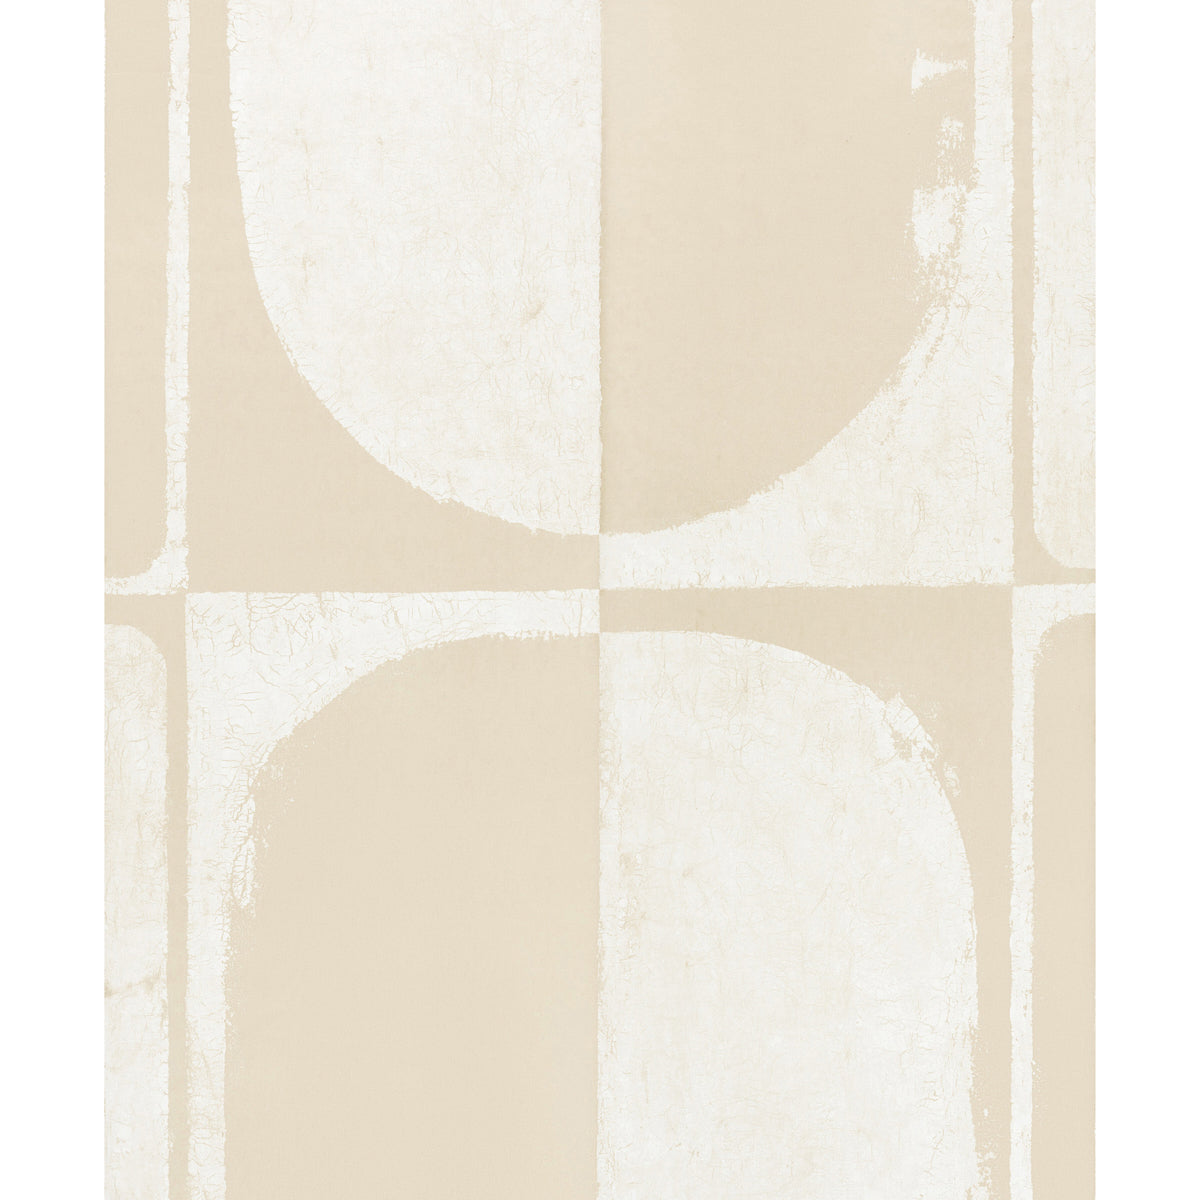 THE CLOISTERS PANEL SET | WARM WHITE